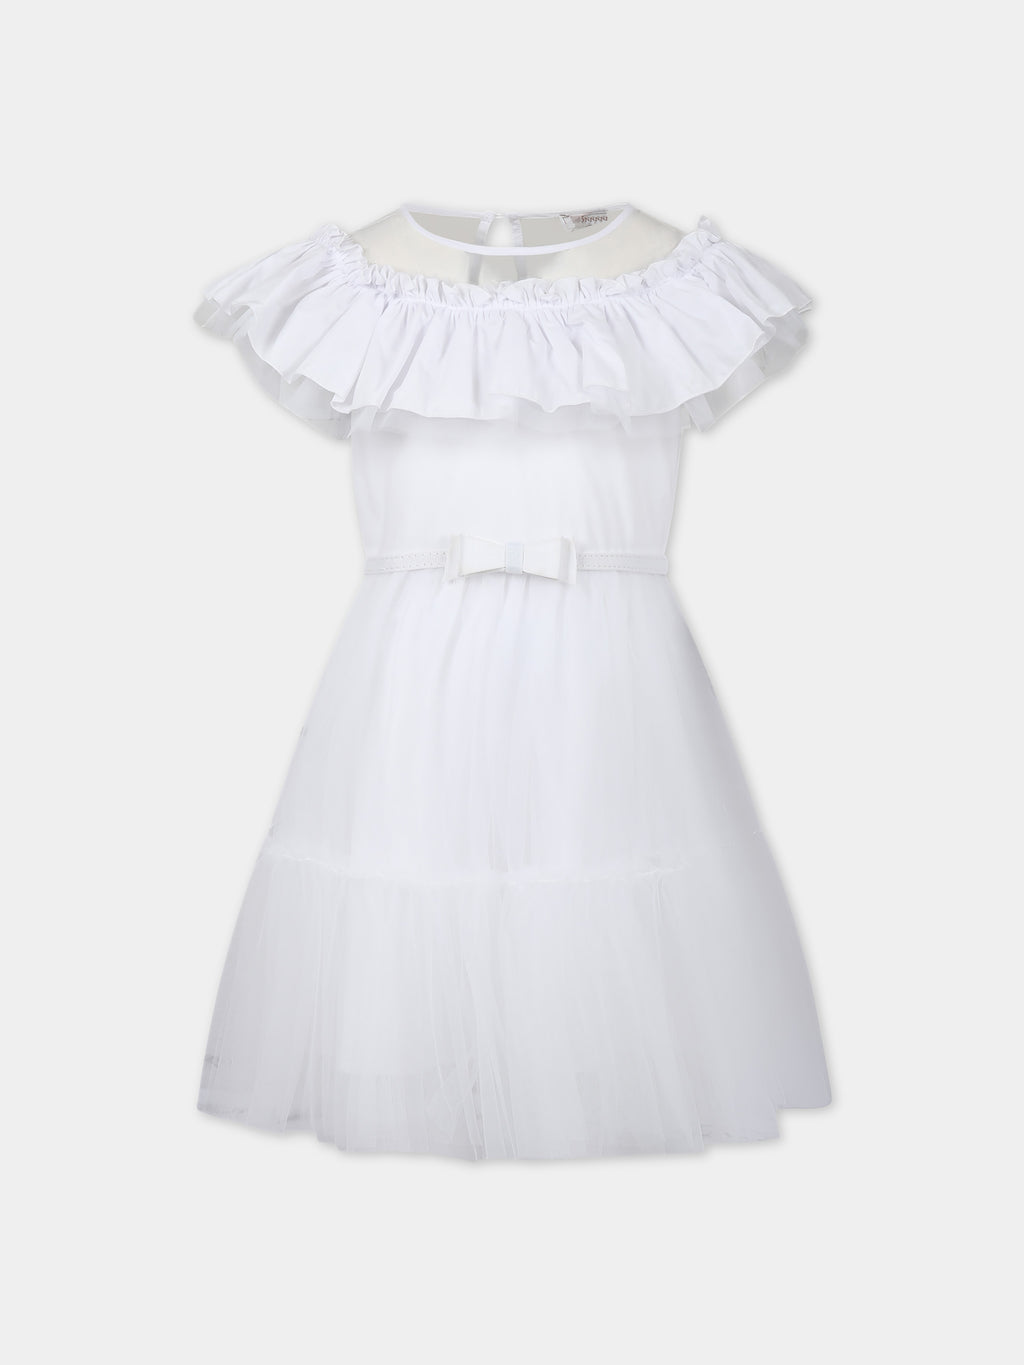 White dress for girl with tulle and ruffles